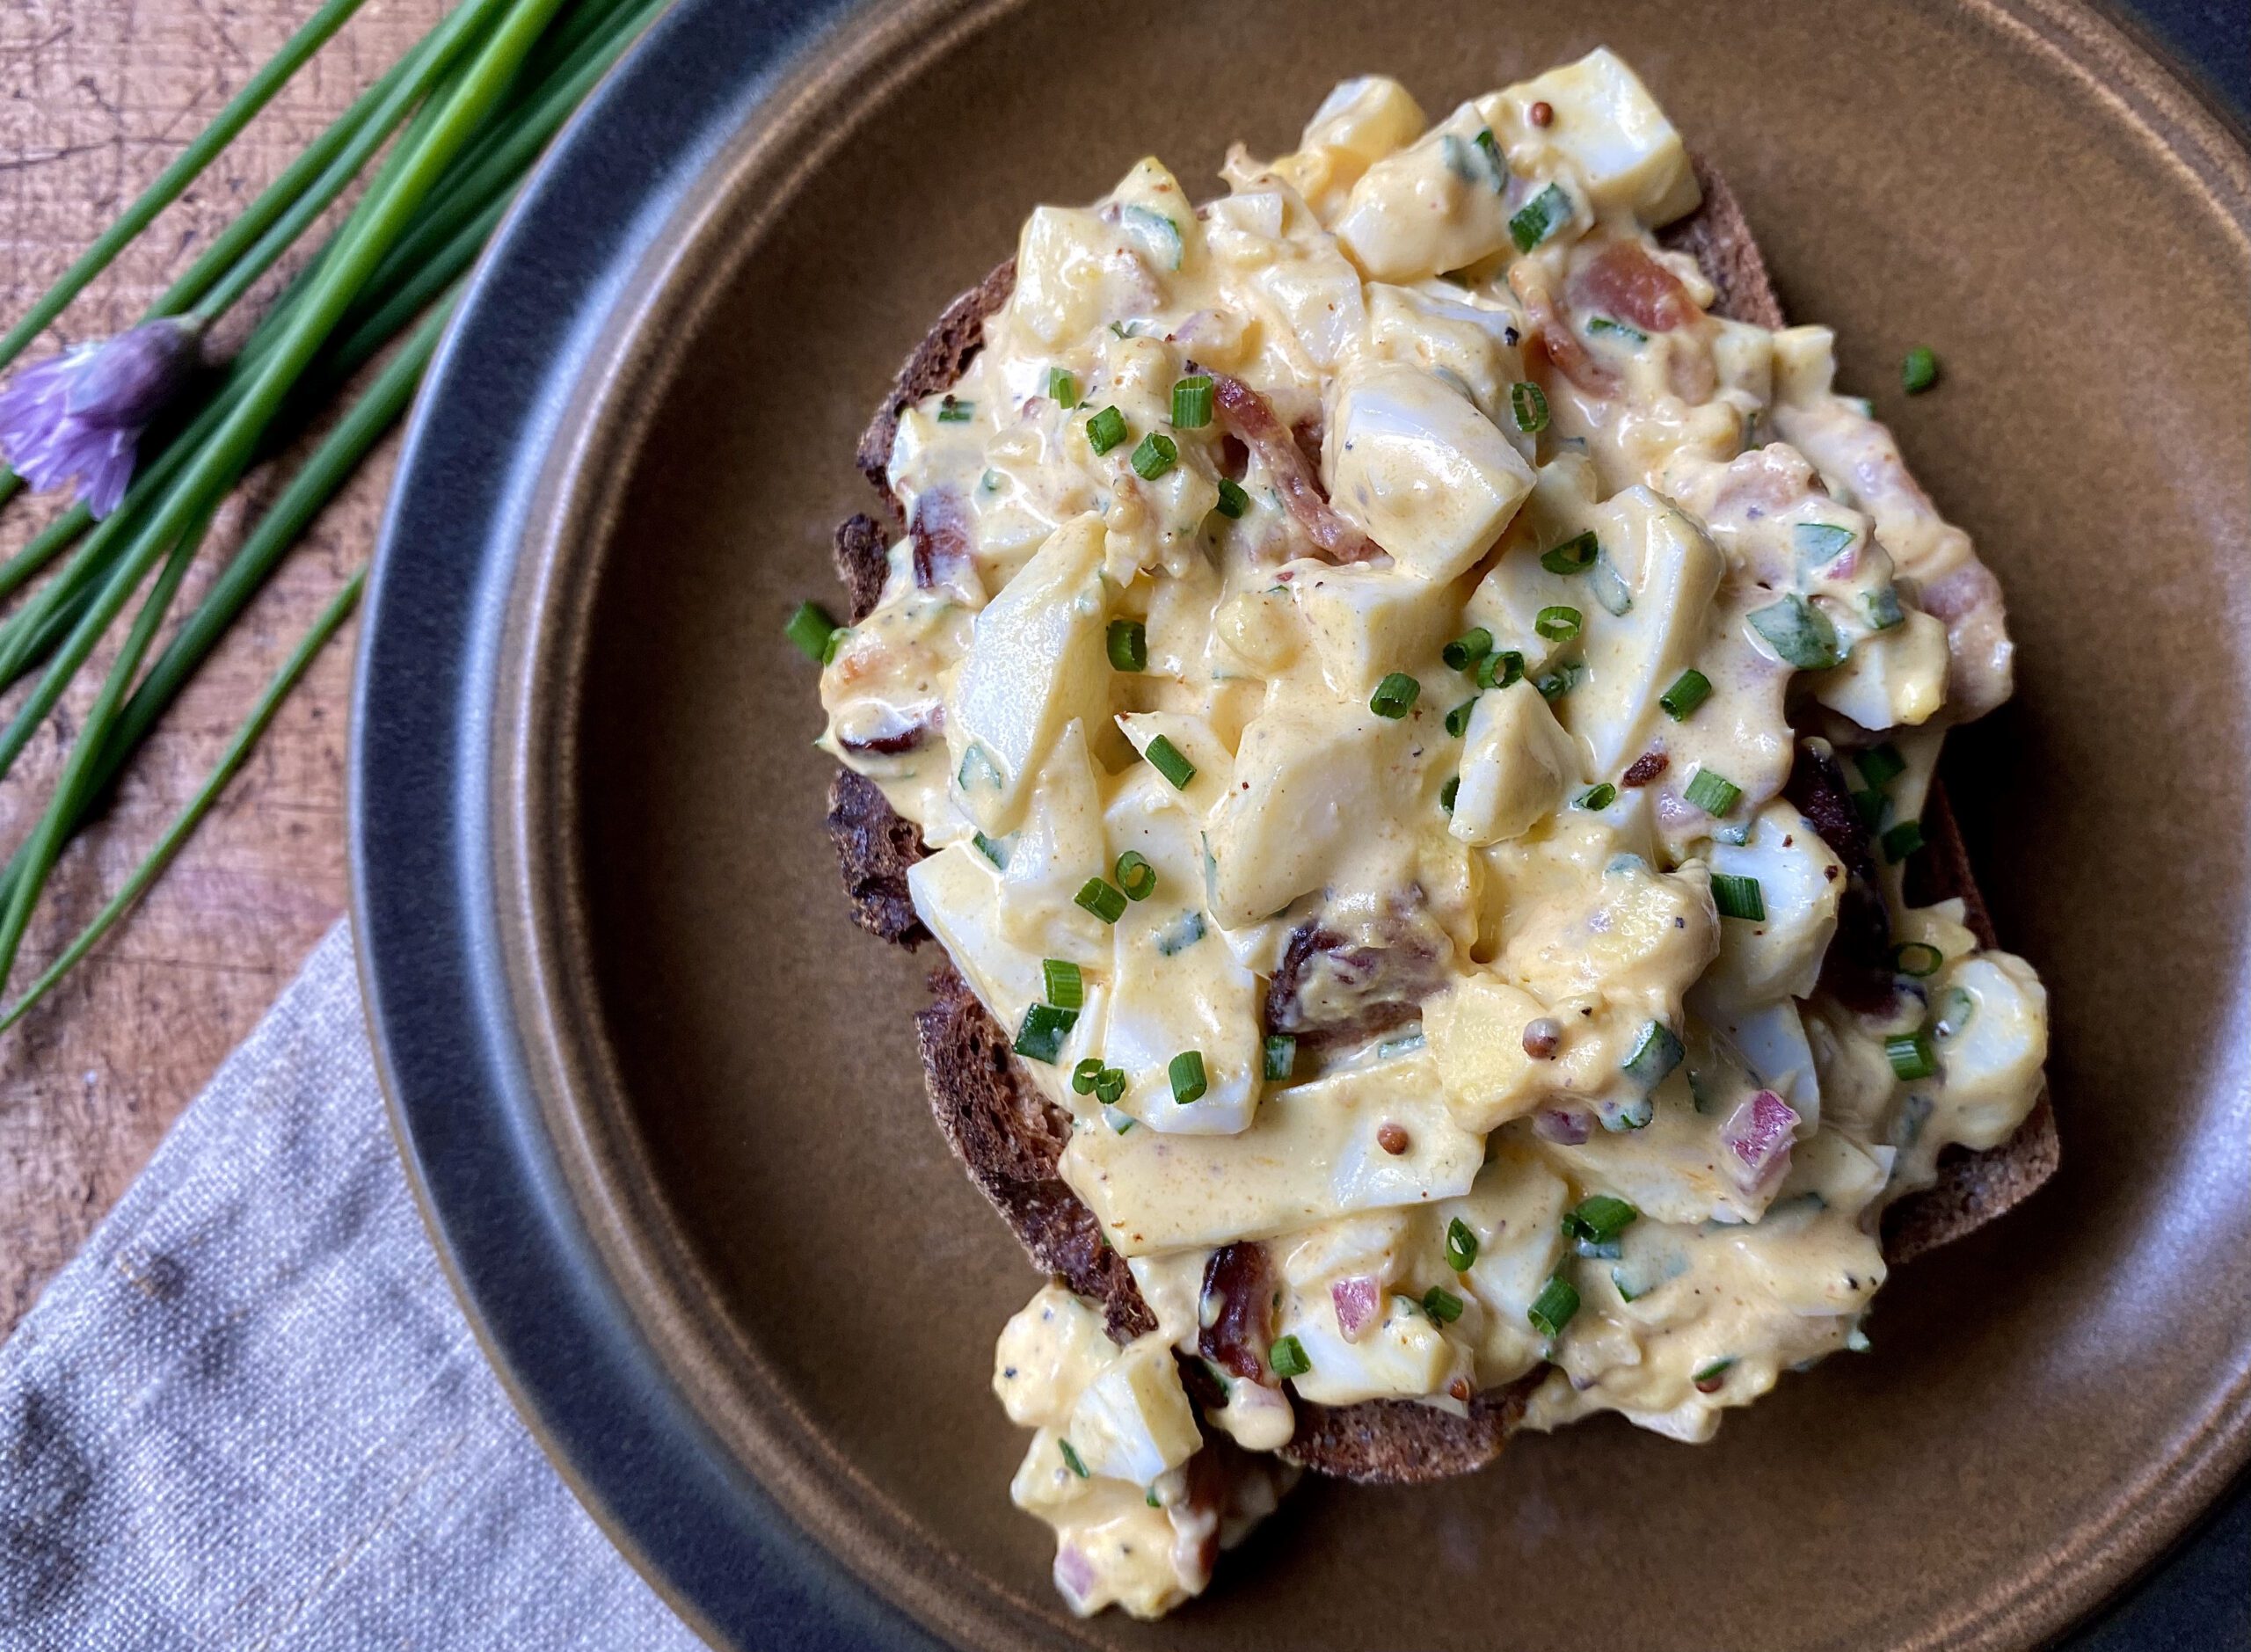 Creamy egg salad with bacon, onion, and parsley that is served on crusty toast and garnished with chives